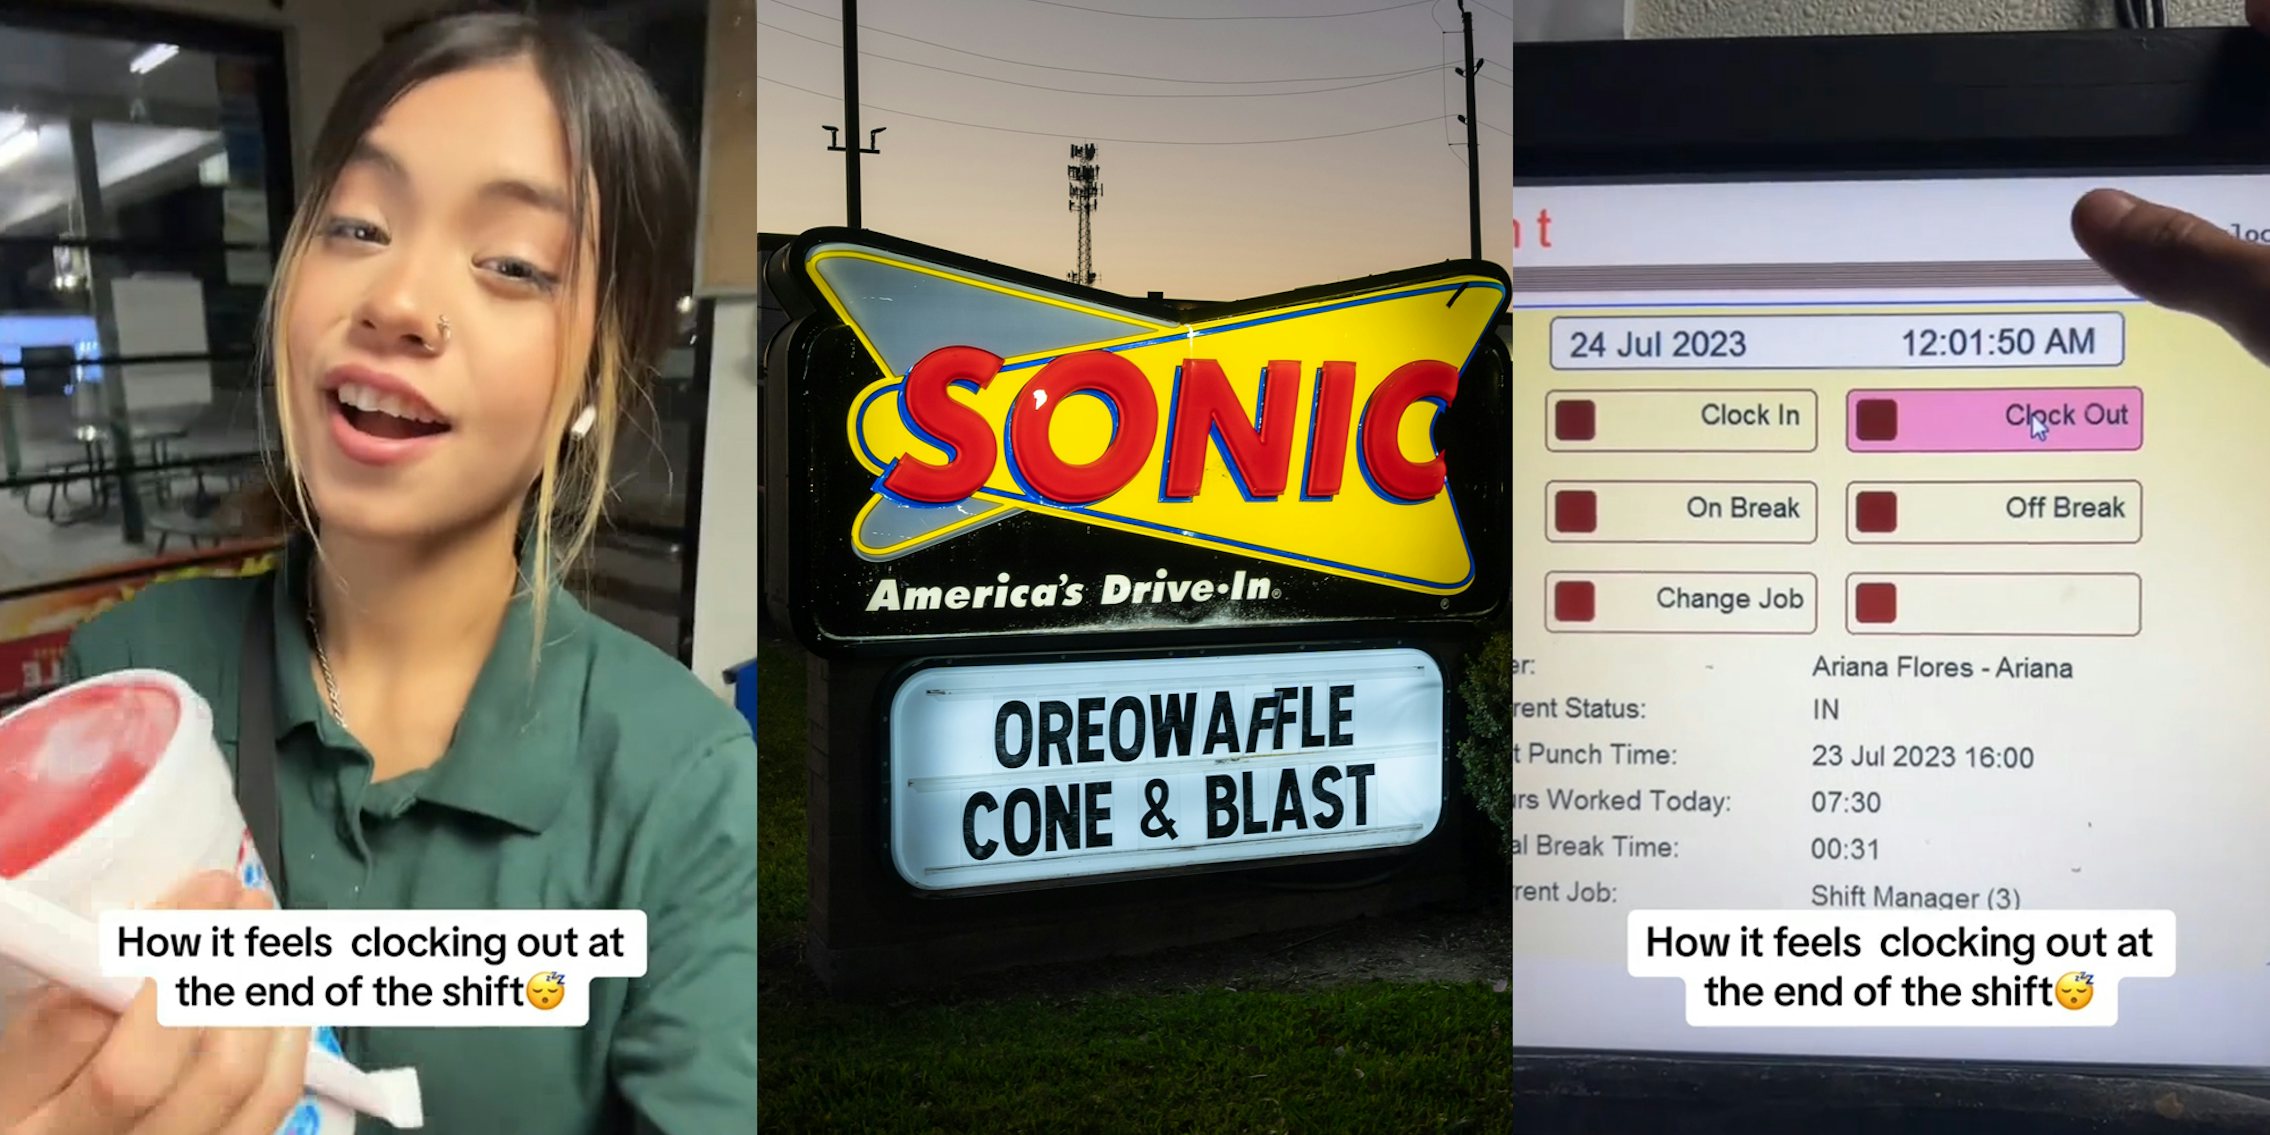 Sonic worker with caption 'How it feels clocking out at the end of the shift' (l) Sonic sign at night (c) Sonic touch screen menu with clock out option selected with caption 'How it feels clocking out at the end of the shift' (r)